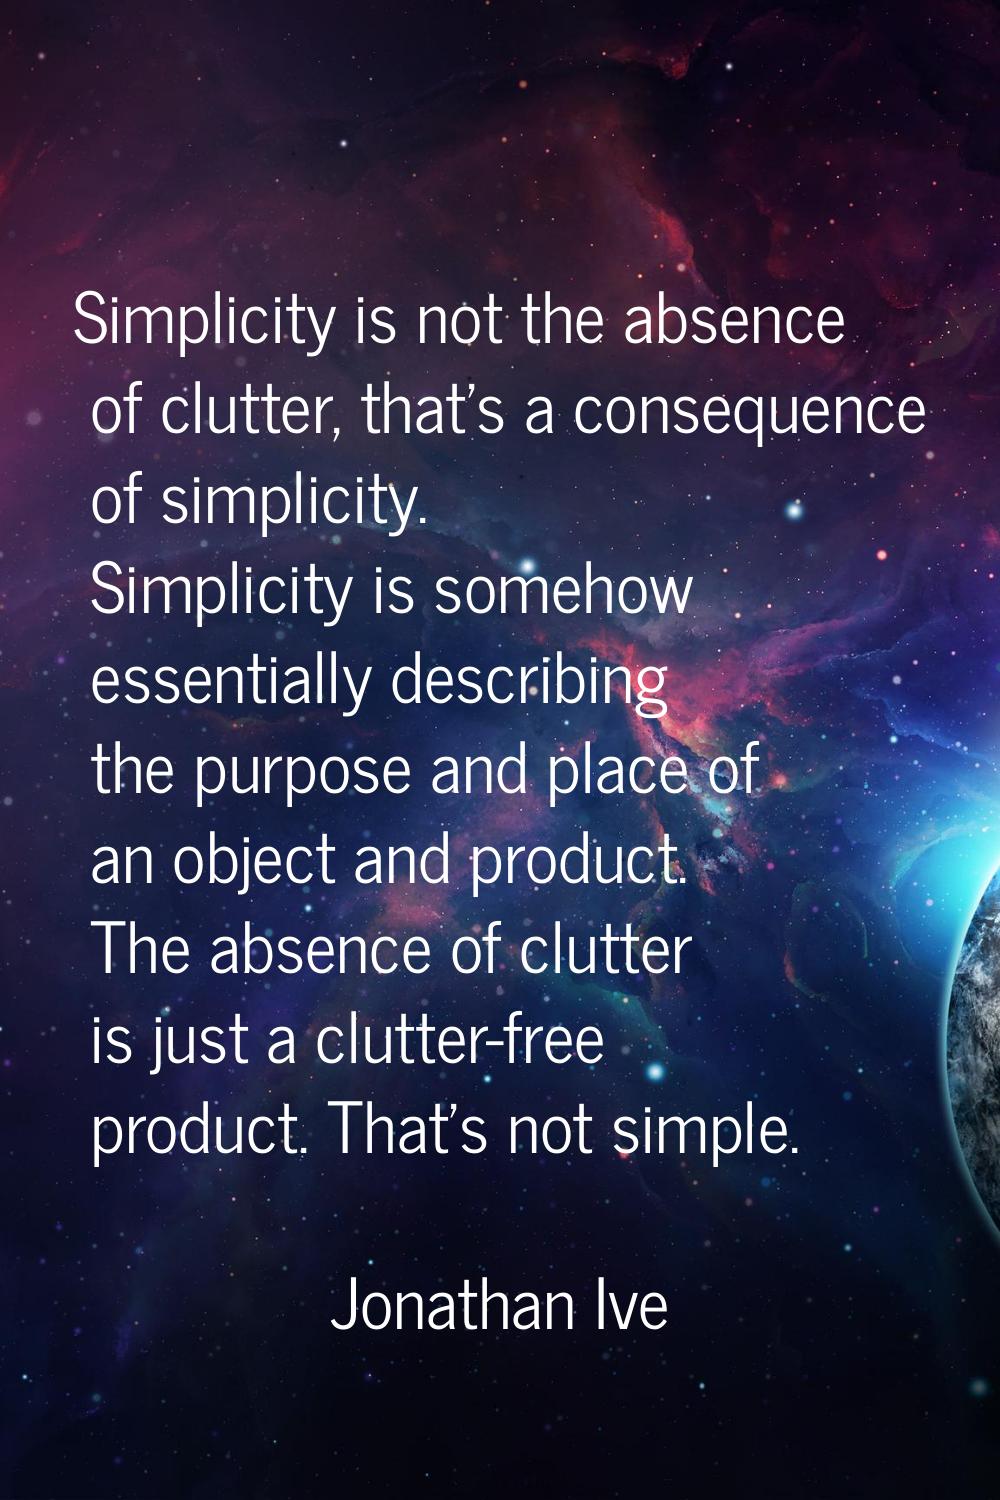 Simplicity is not the absence of clutter, that's a consequence of simplicity. Simplicity is somehow